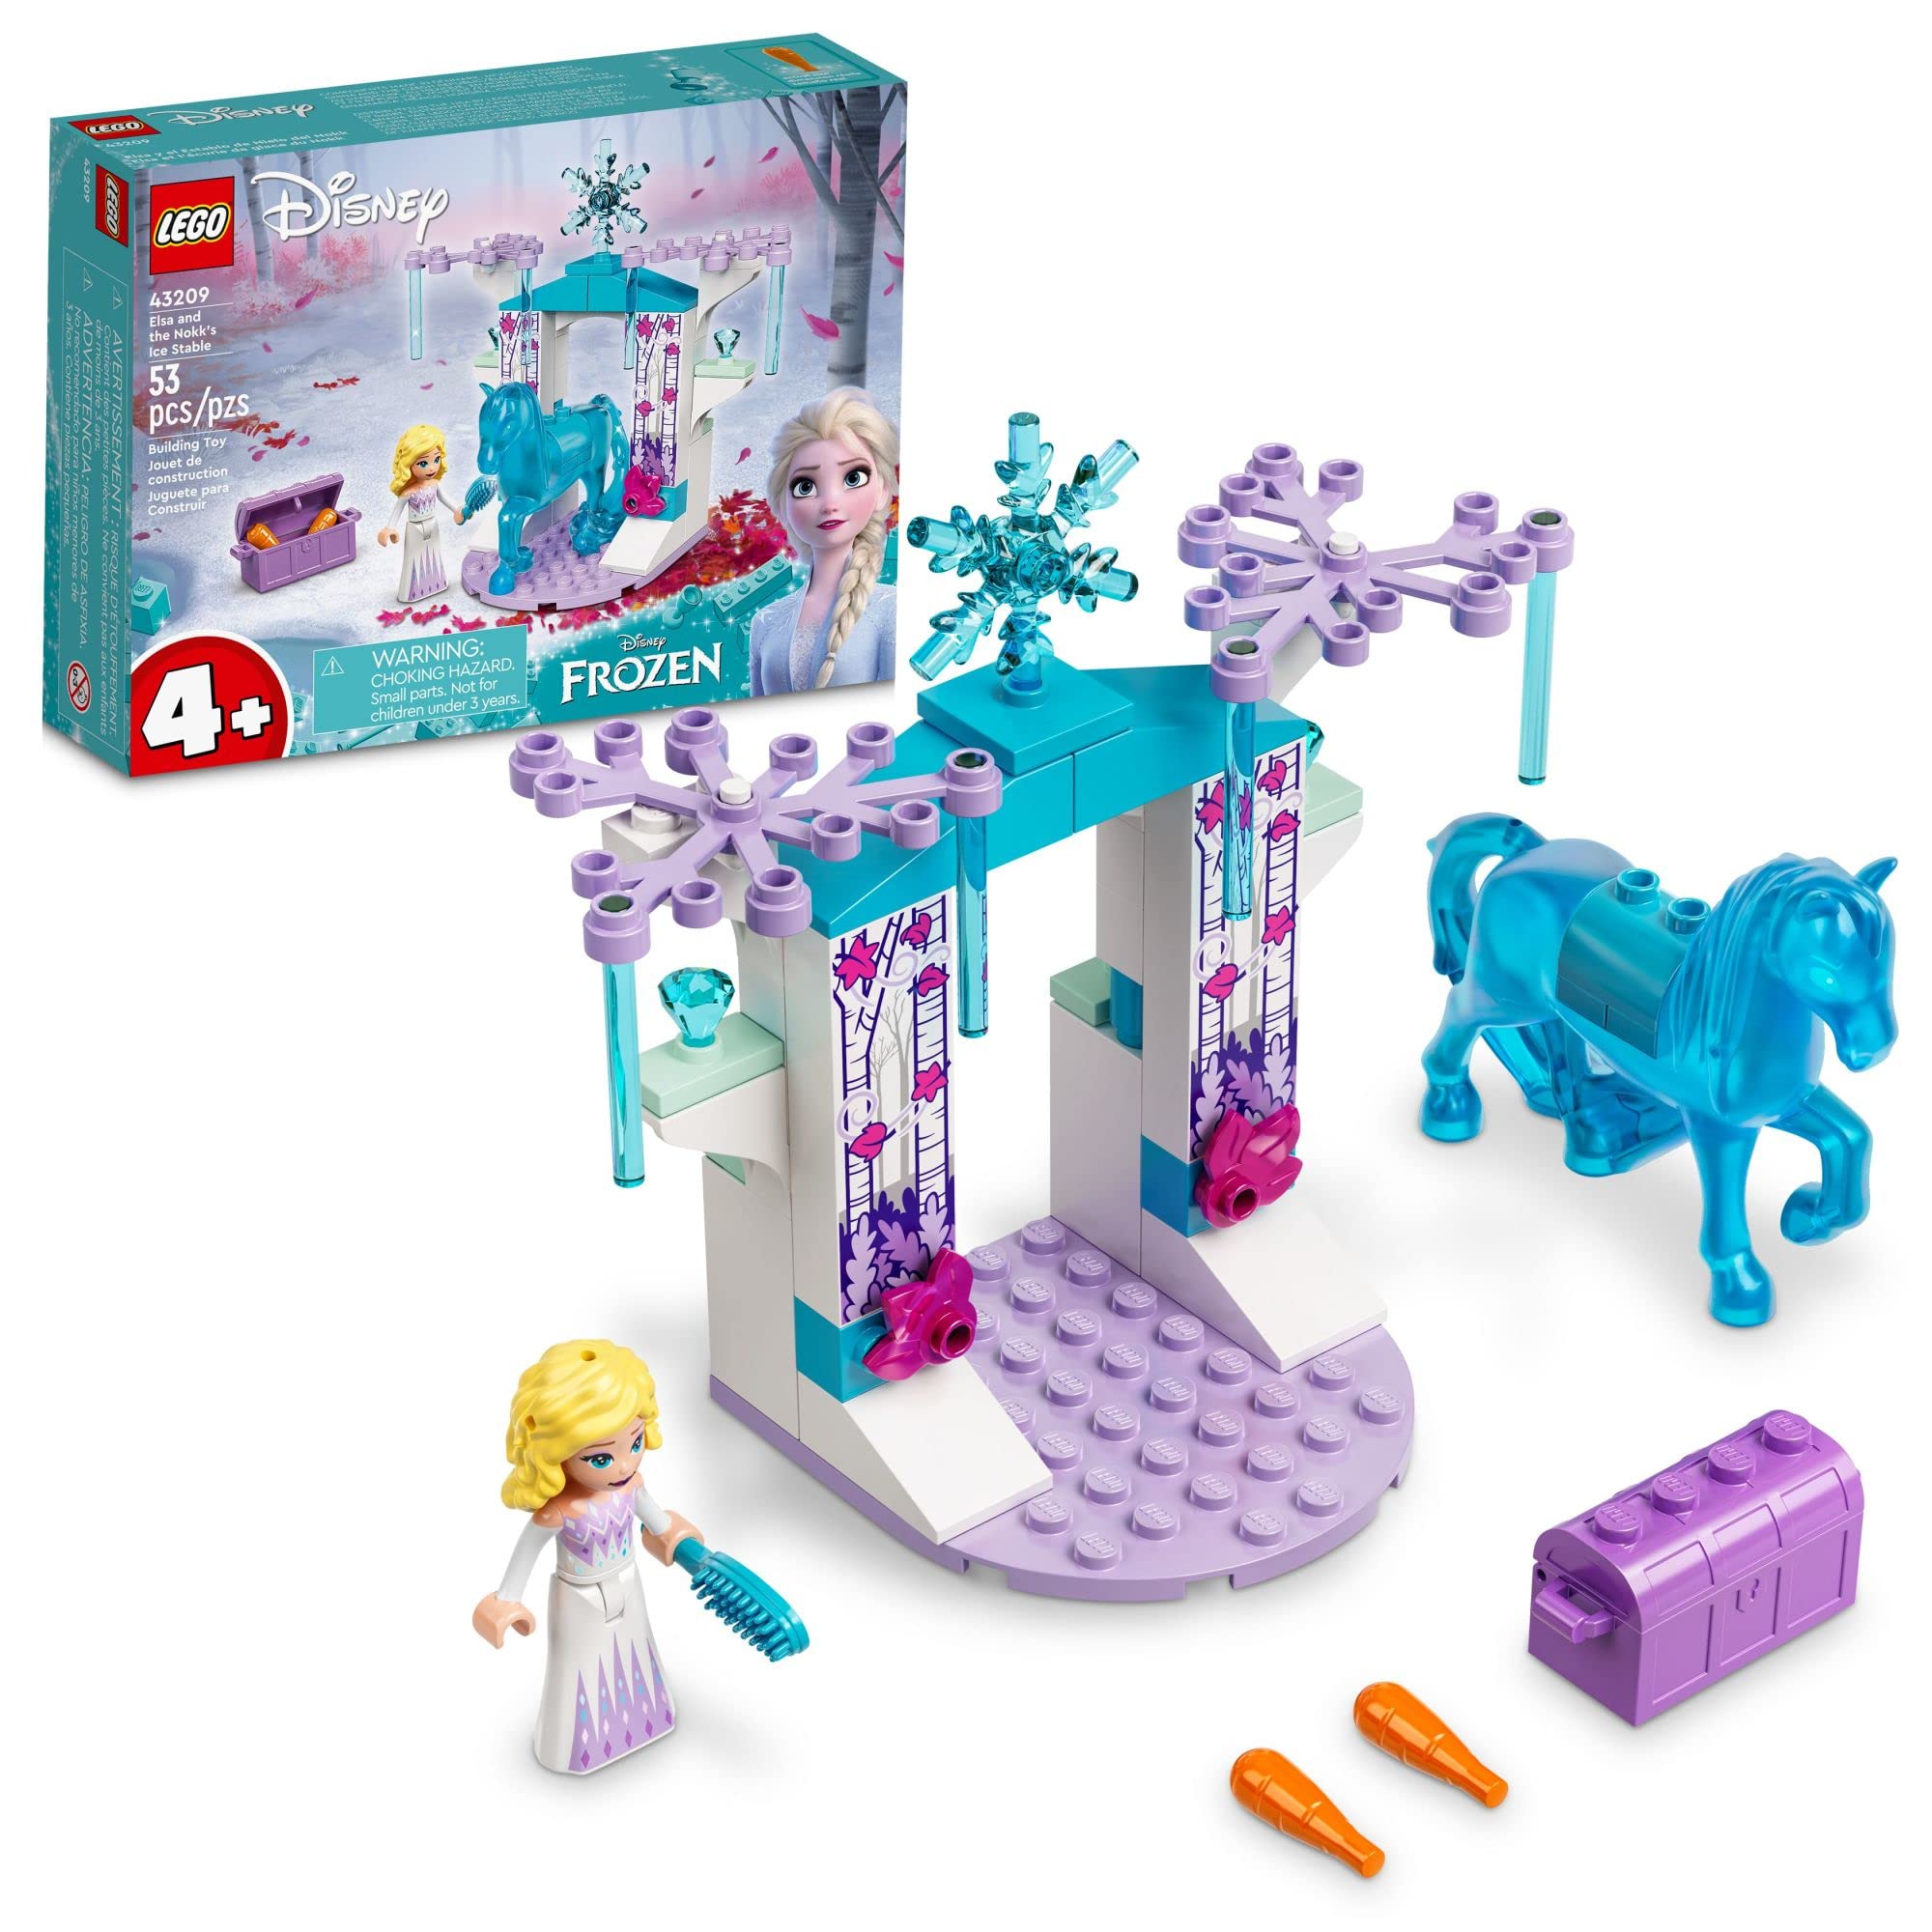 LEGO Disney Princess Elsa and The Nokk’s Ice Stable 43209 Set, with Buildable Frozen Toy Horse Figure for Kids Age 4 Plus and Mini-Doll, Birthday Gift for Girls and Boys